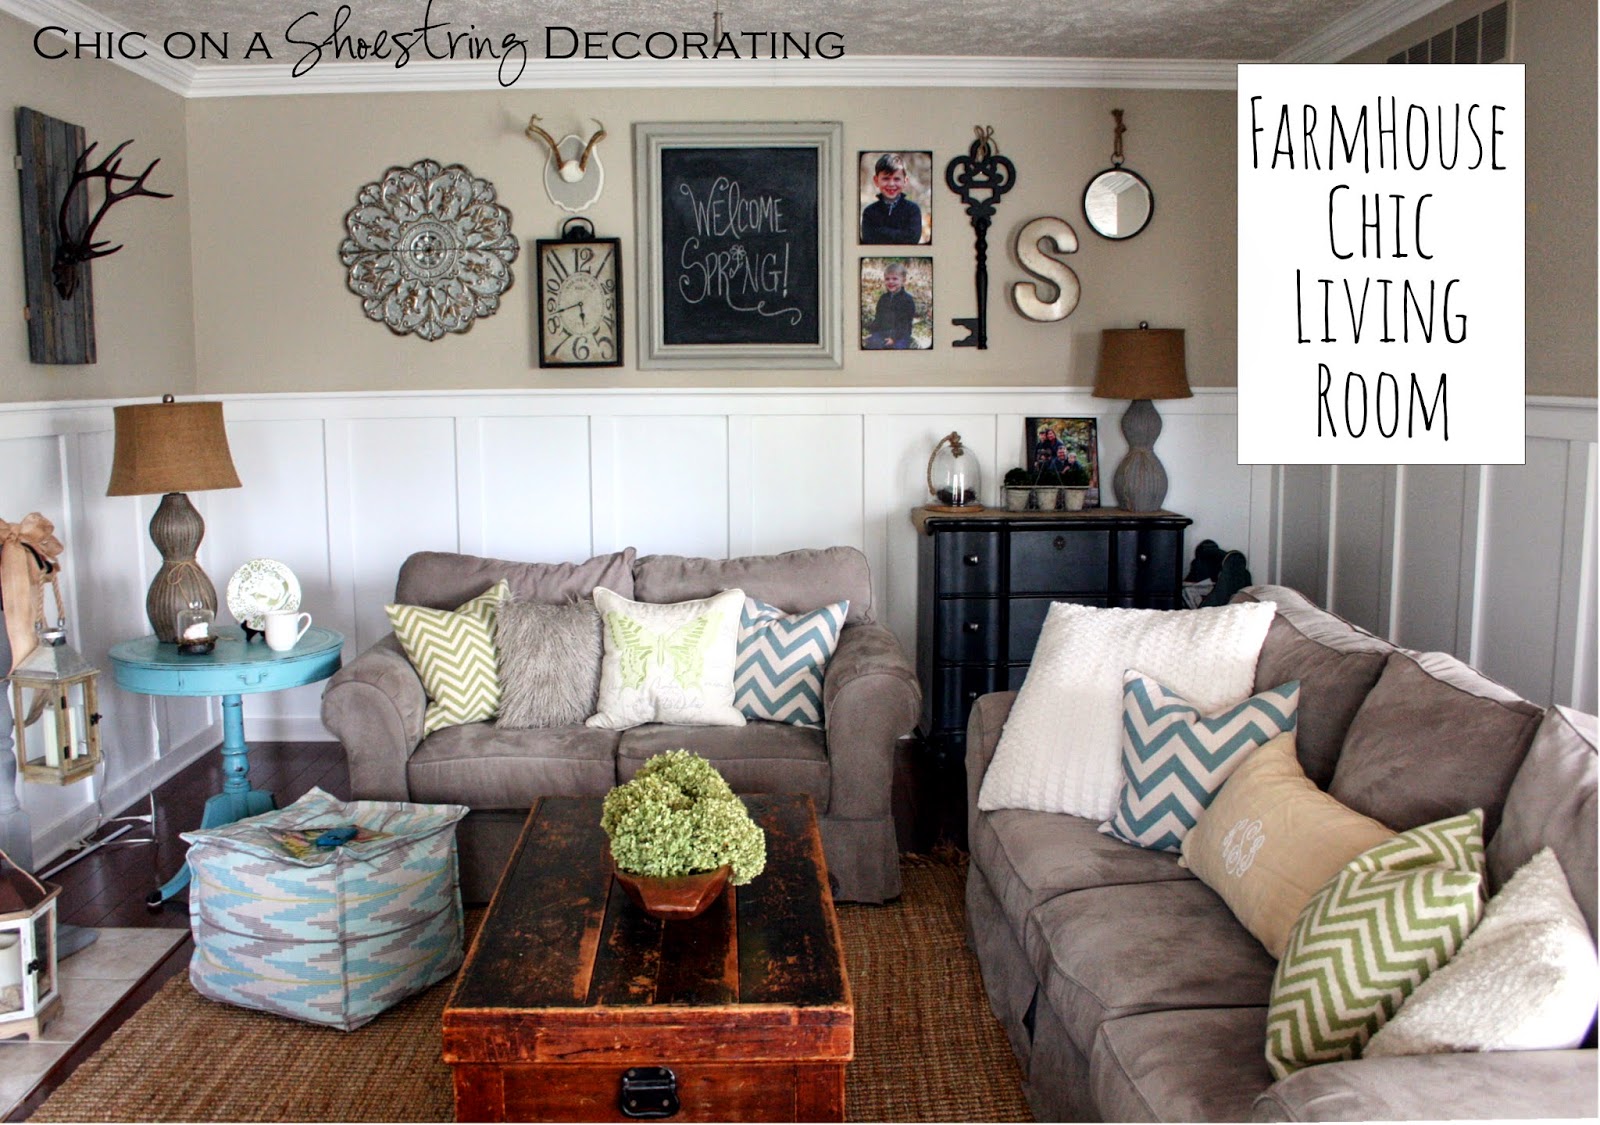 Chic on a Shoestring Decorating  My Farmhouse  Chic Living  